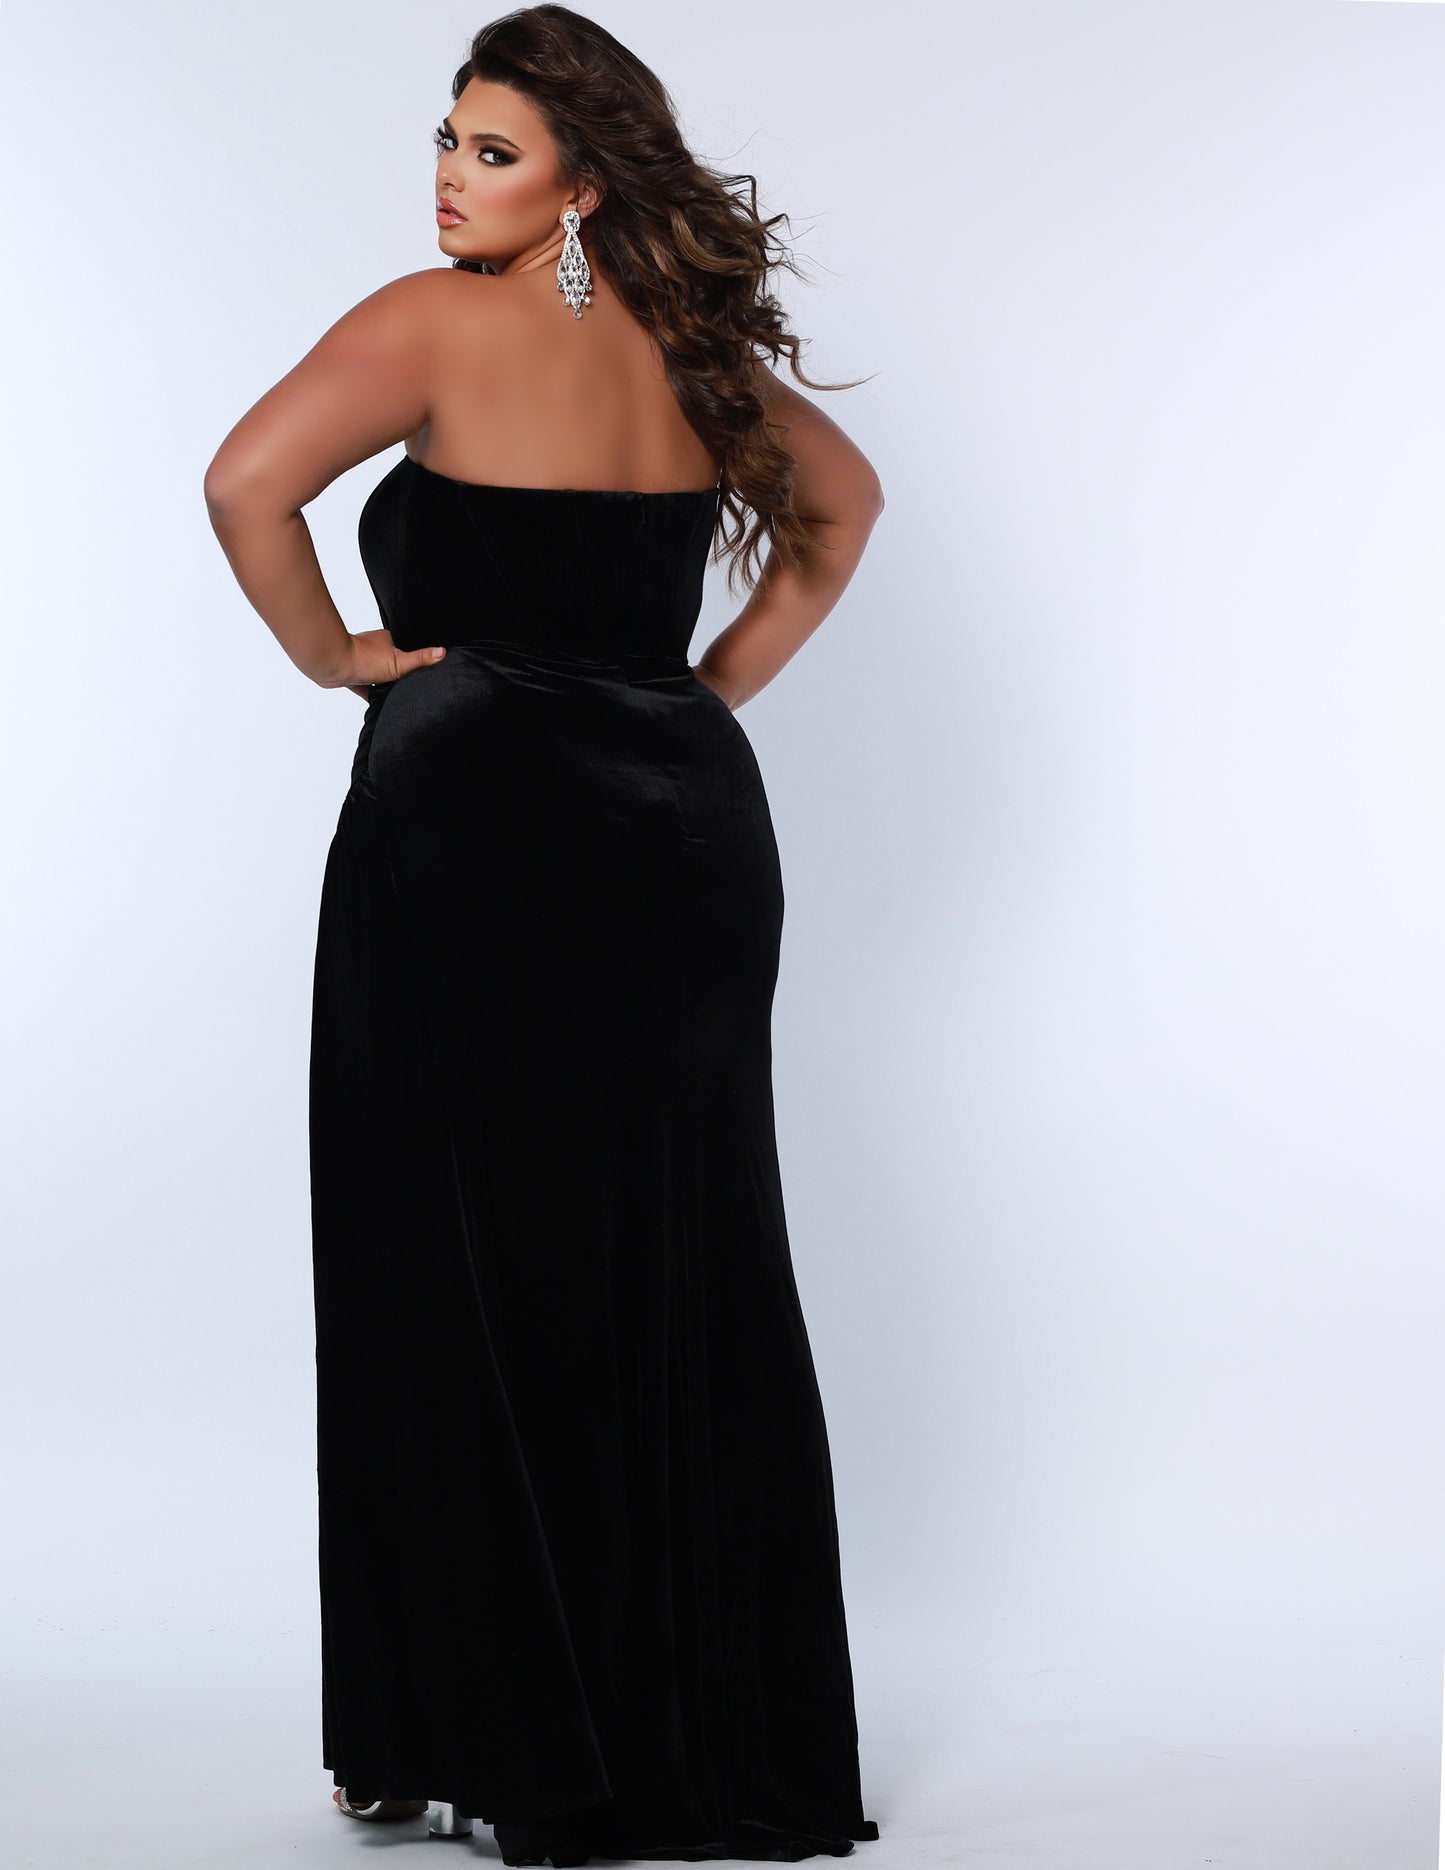 The Sydney's Closet SC7342 is a luxurious Velvet Prom Dress Strapless Evening Gown with a fitted and ruched silhouette, ideal for special occasions. It offers a classic and timeless look with a touch of sophistication. Its rich fabric provides a comfortable fit and feel.